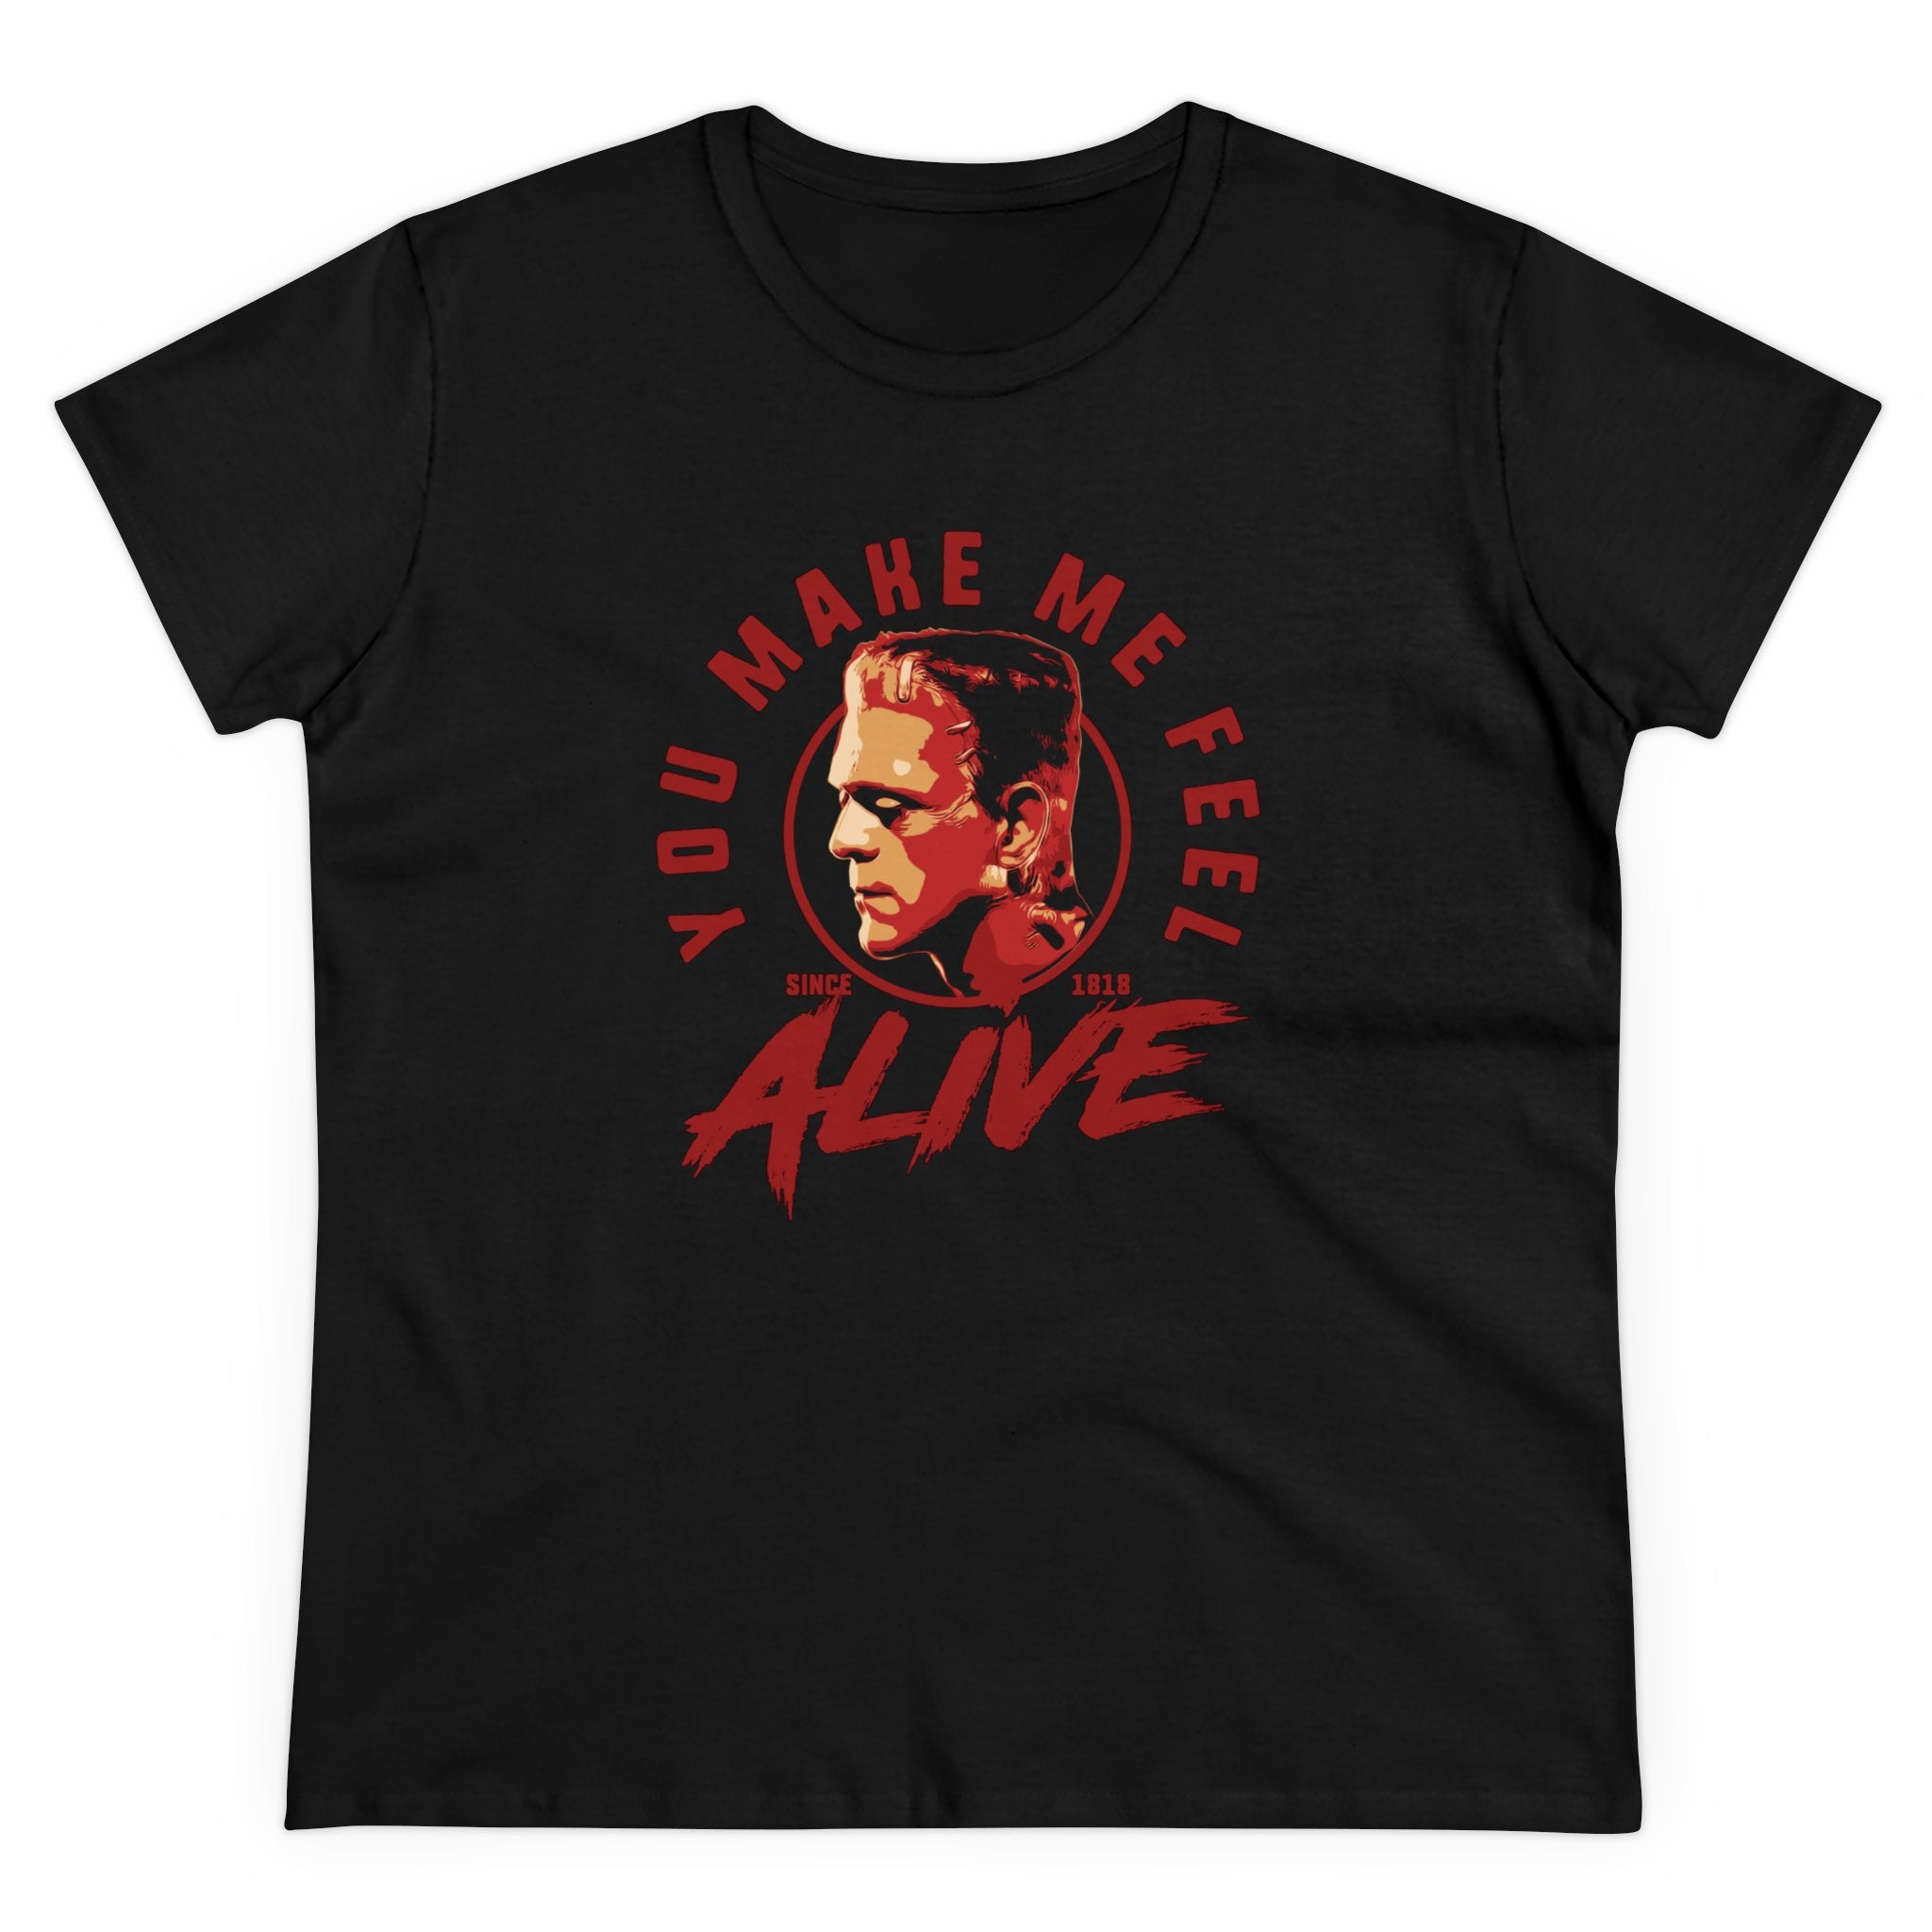 Alive - Women's Tee: Women's black tee with a red and gold design featuring a man's face. The text reads "You Make Me Feel Alive" with "Since 1918" below the face. This pre-shrunk, fashionable statement piece is perfect for any wardrobe.